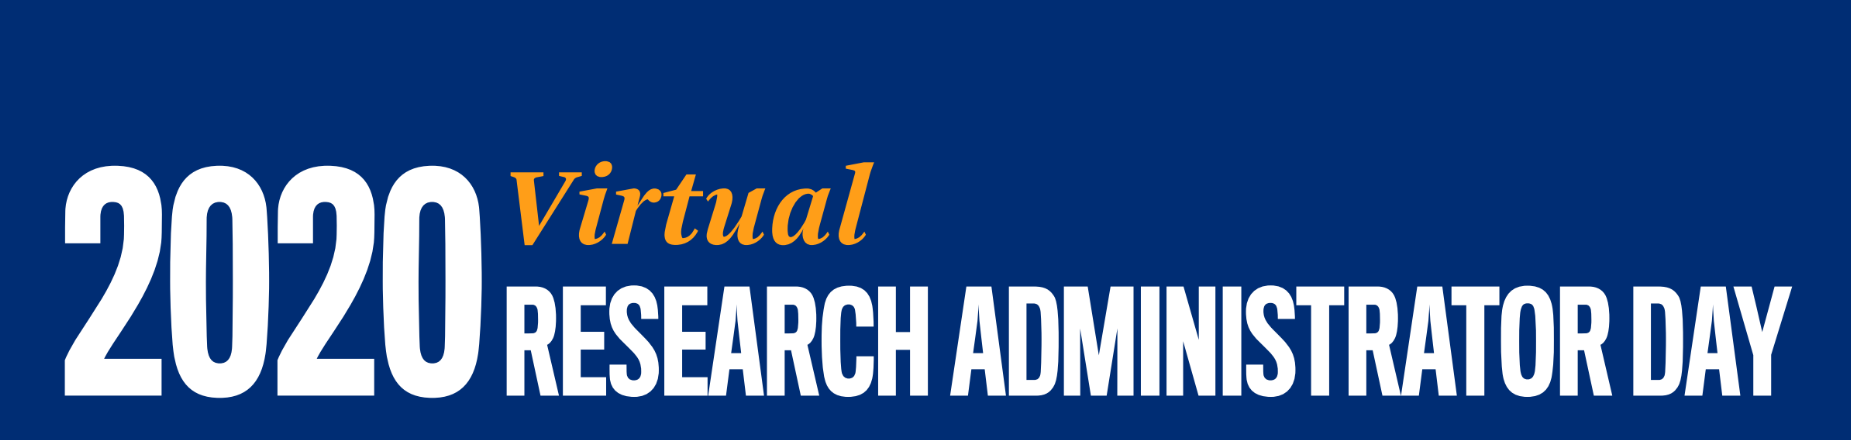 2020 Virtual Research Administration Day